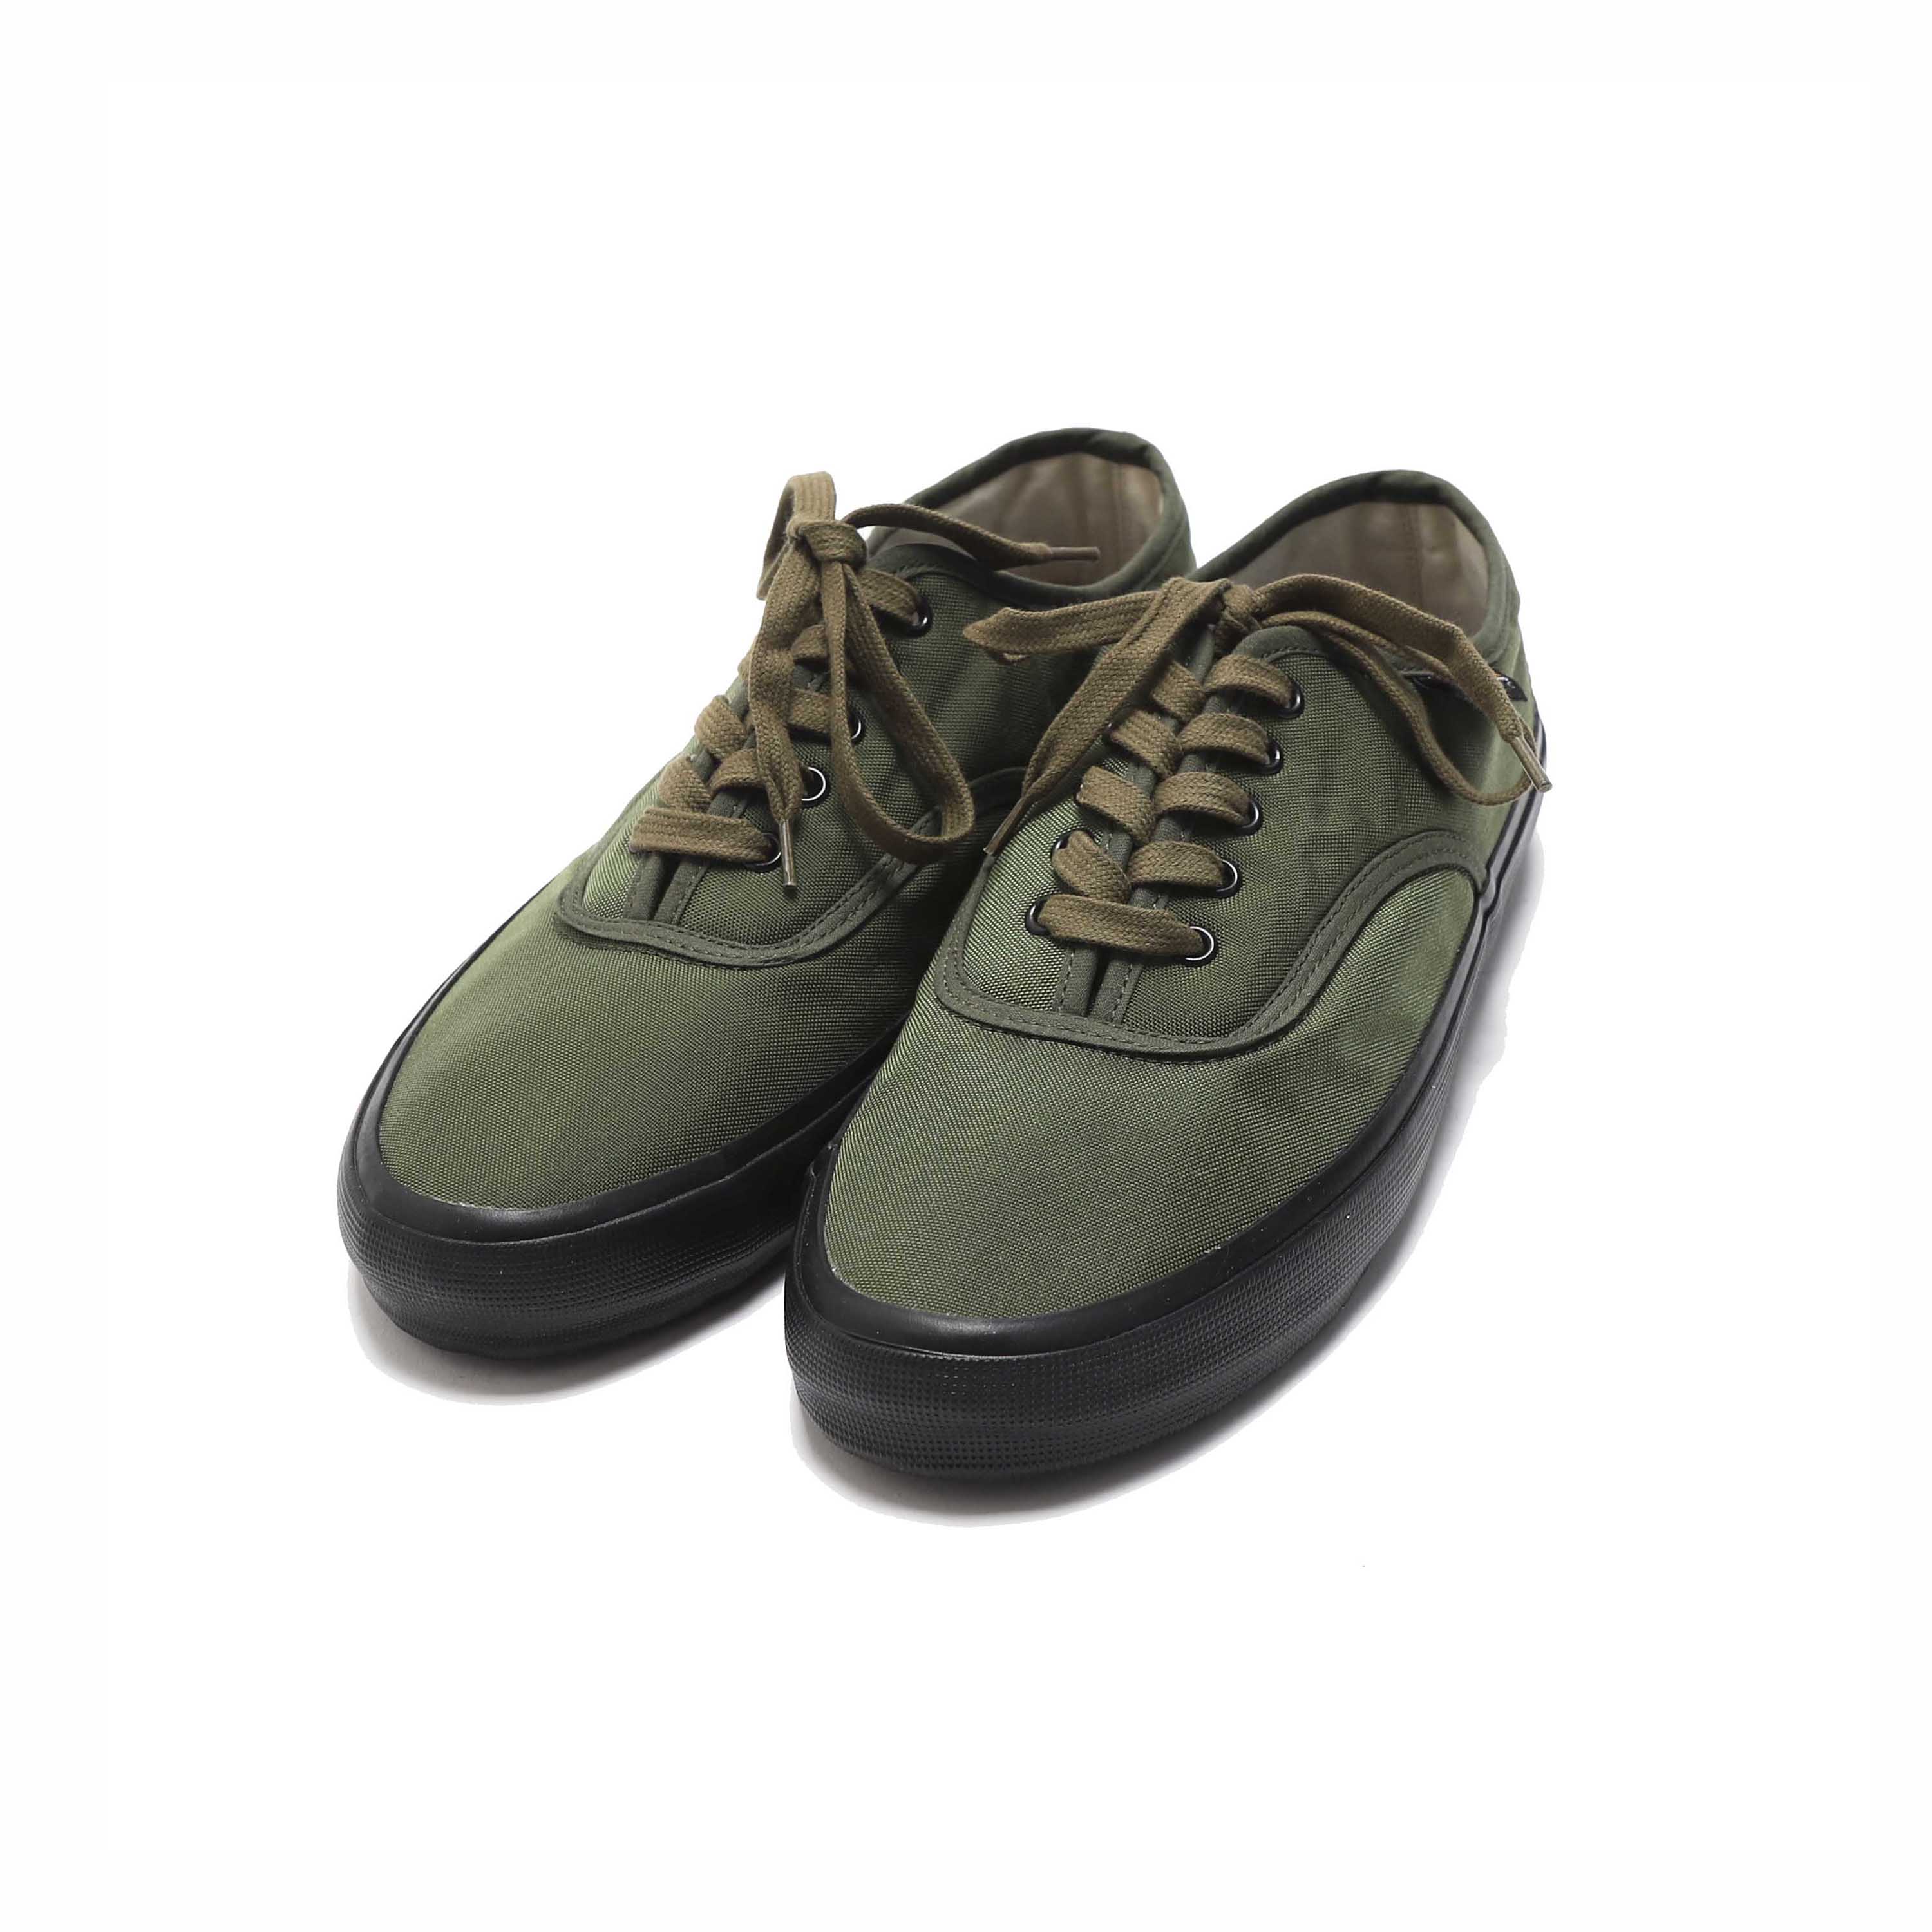 US NAVY MILITARY TRAINER 5851C - OLIVE